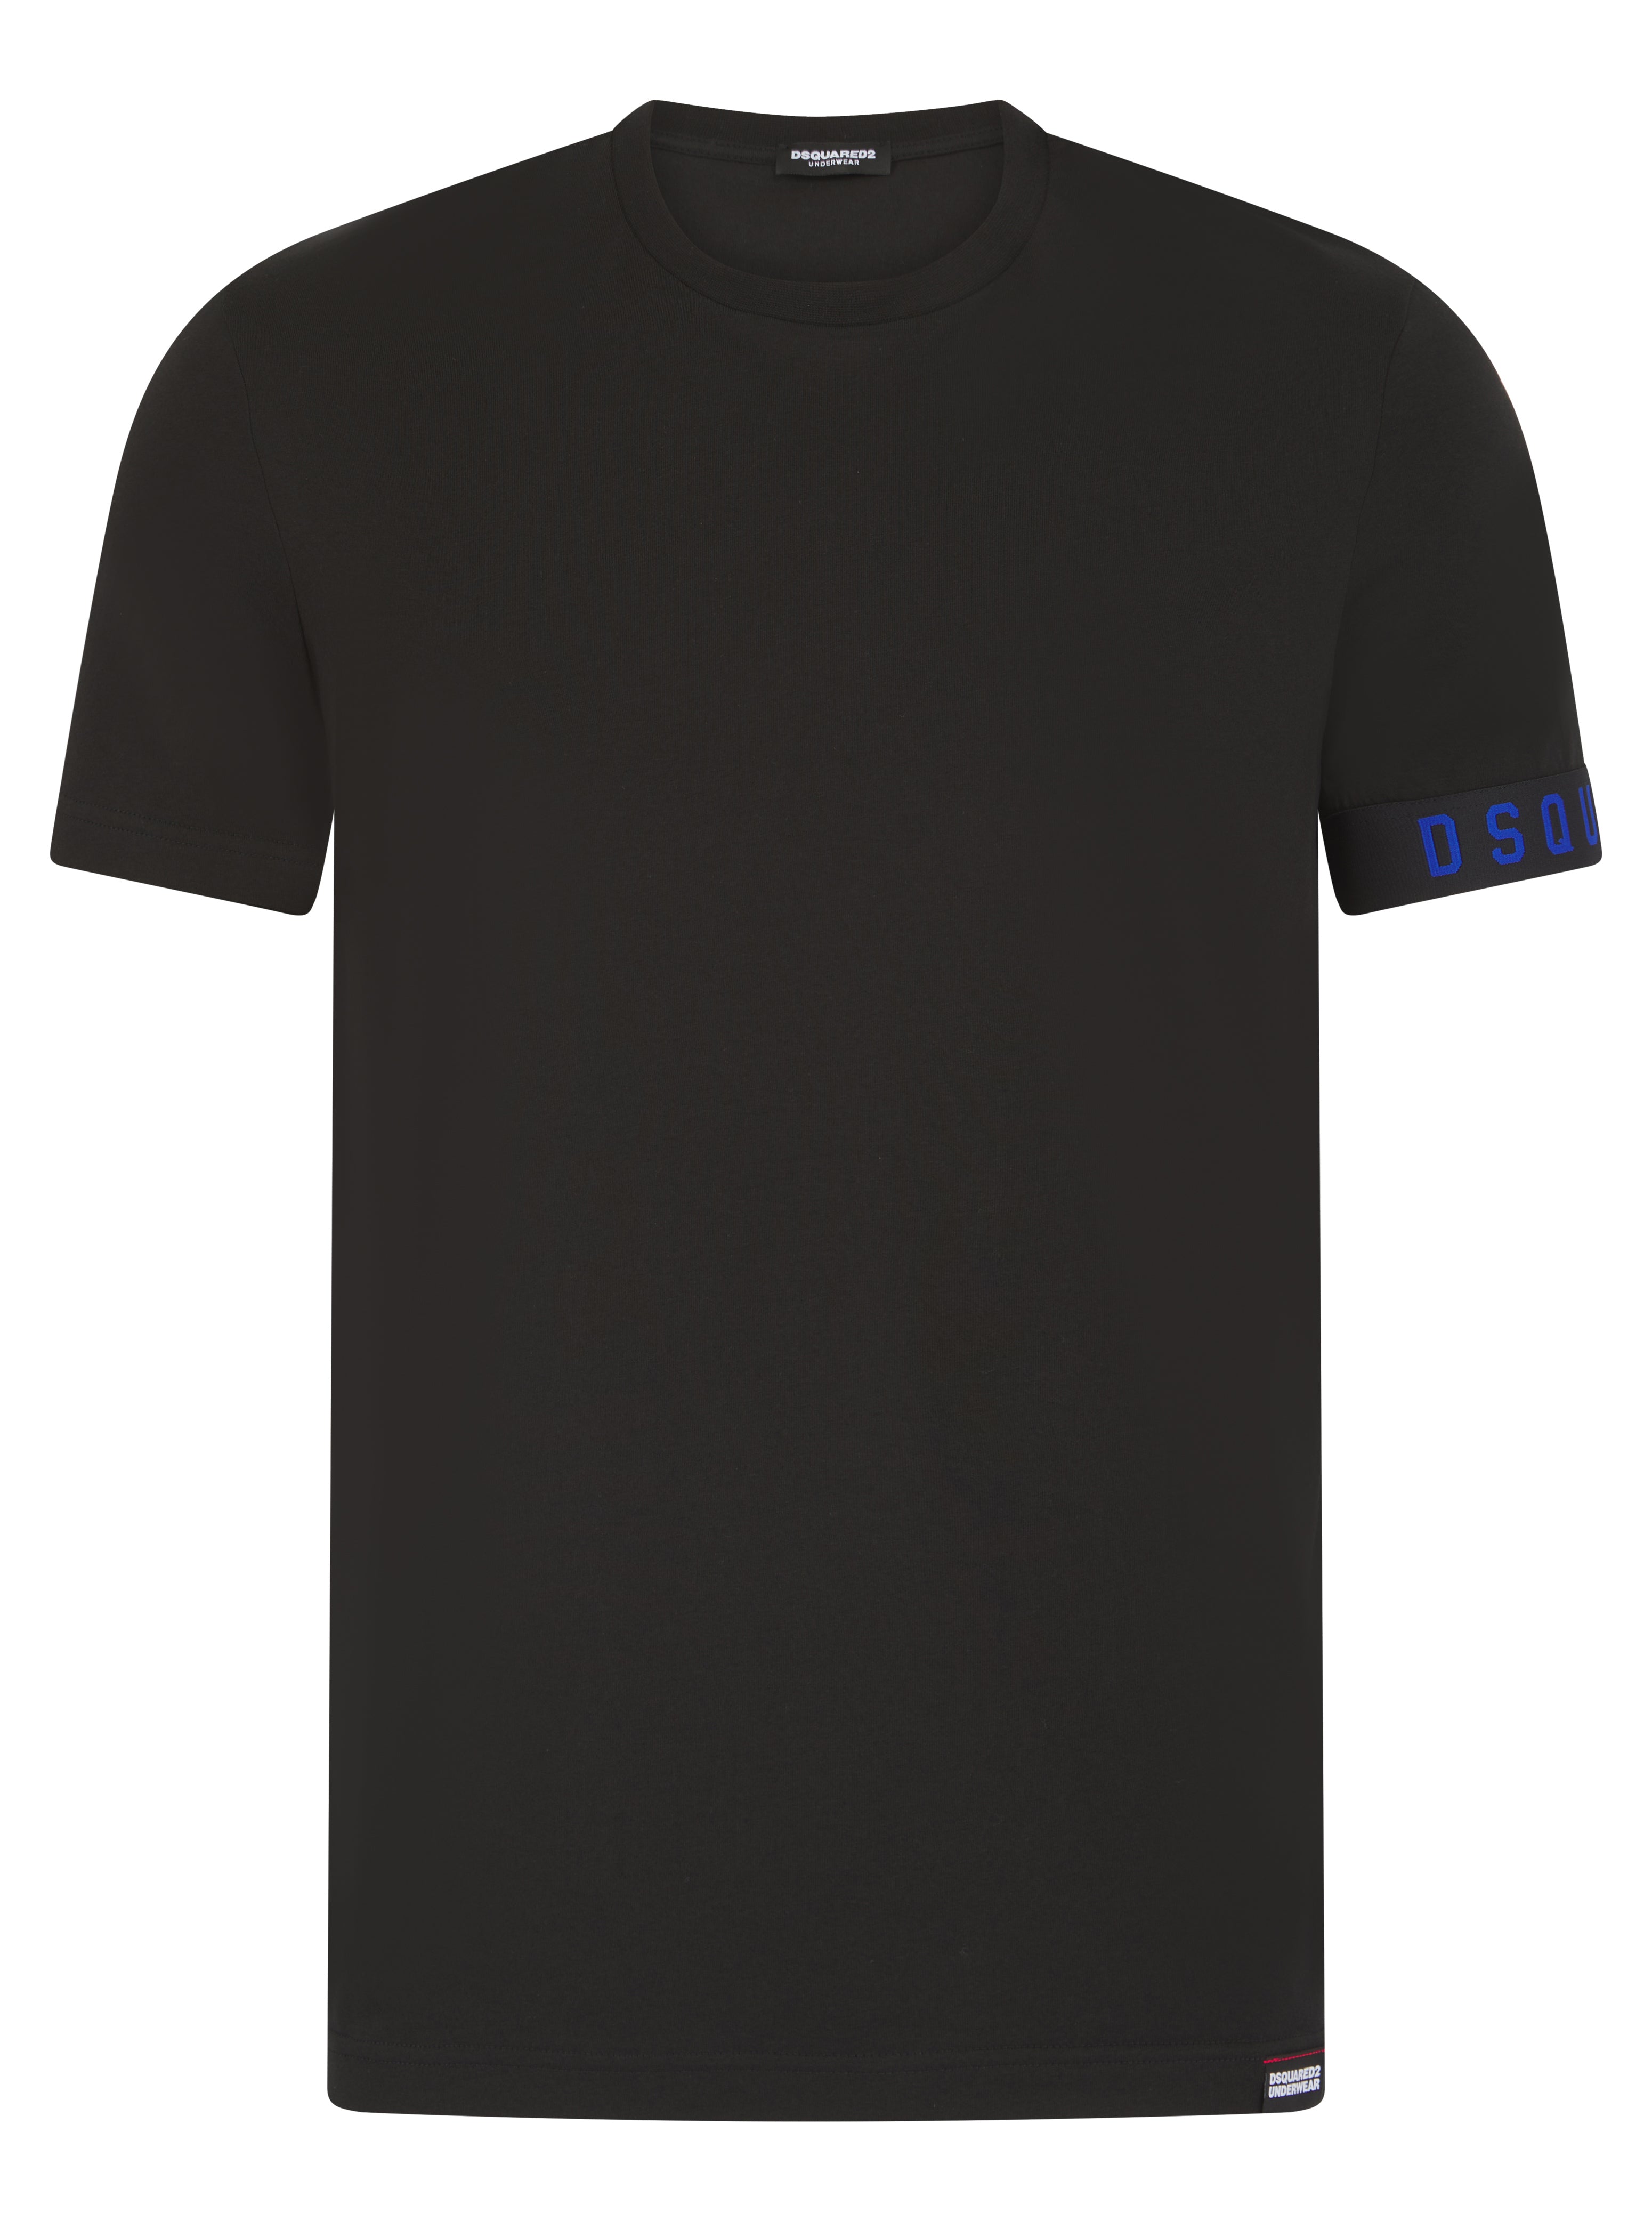 Load image into Gallery viewer, DSquared2 Arm Logo Tee Black
